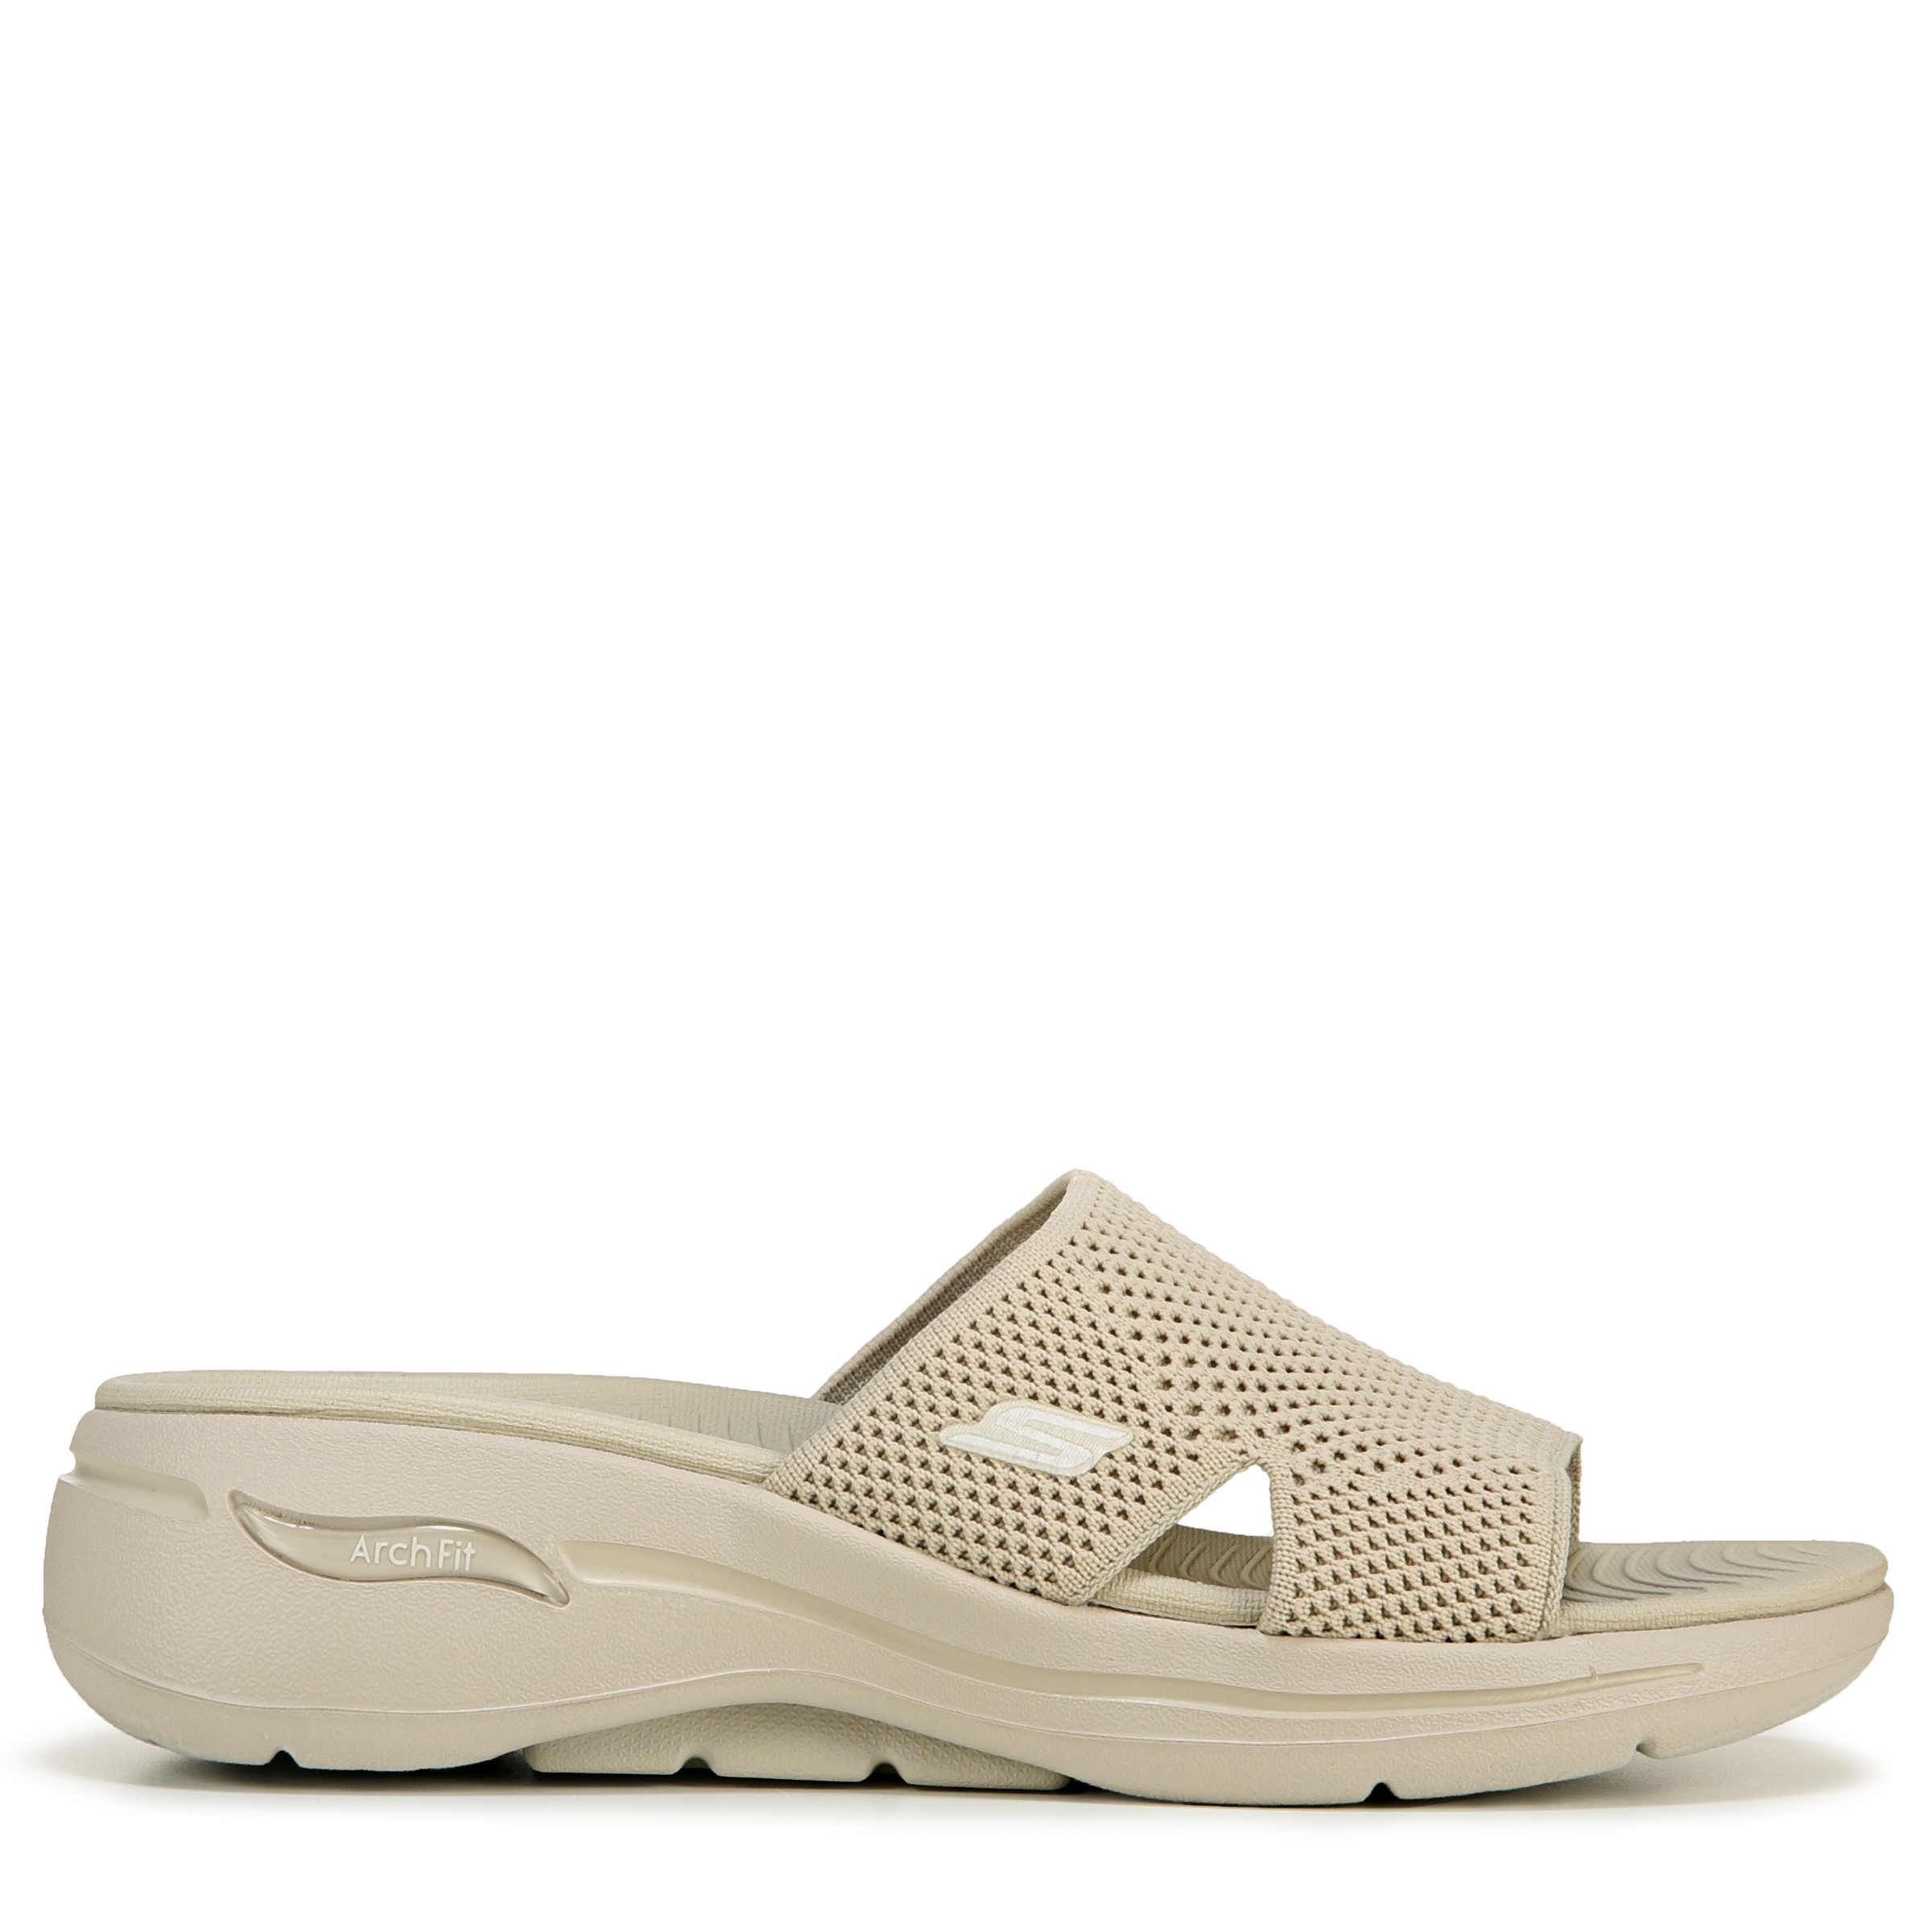 Buy SKECHERS ROSE WOMENS GO WALK ARCH FIT SANDAL - AST Online at